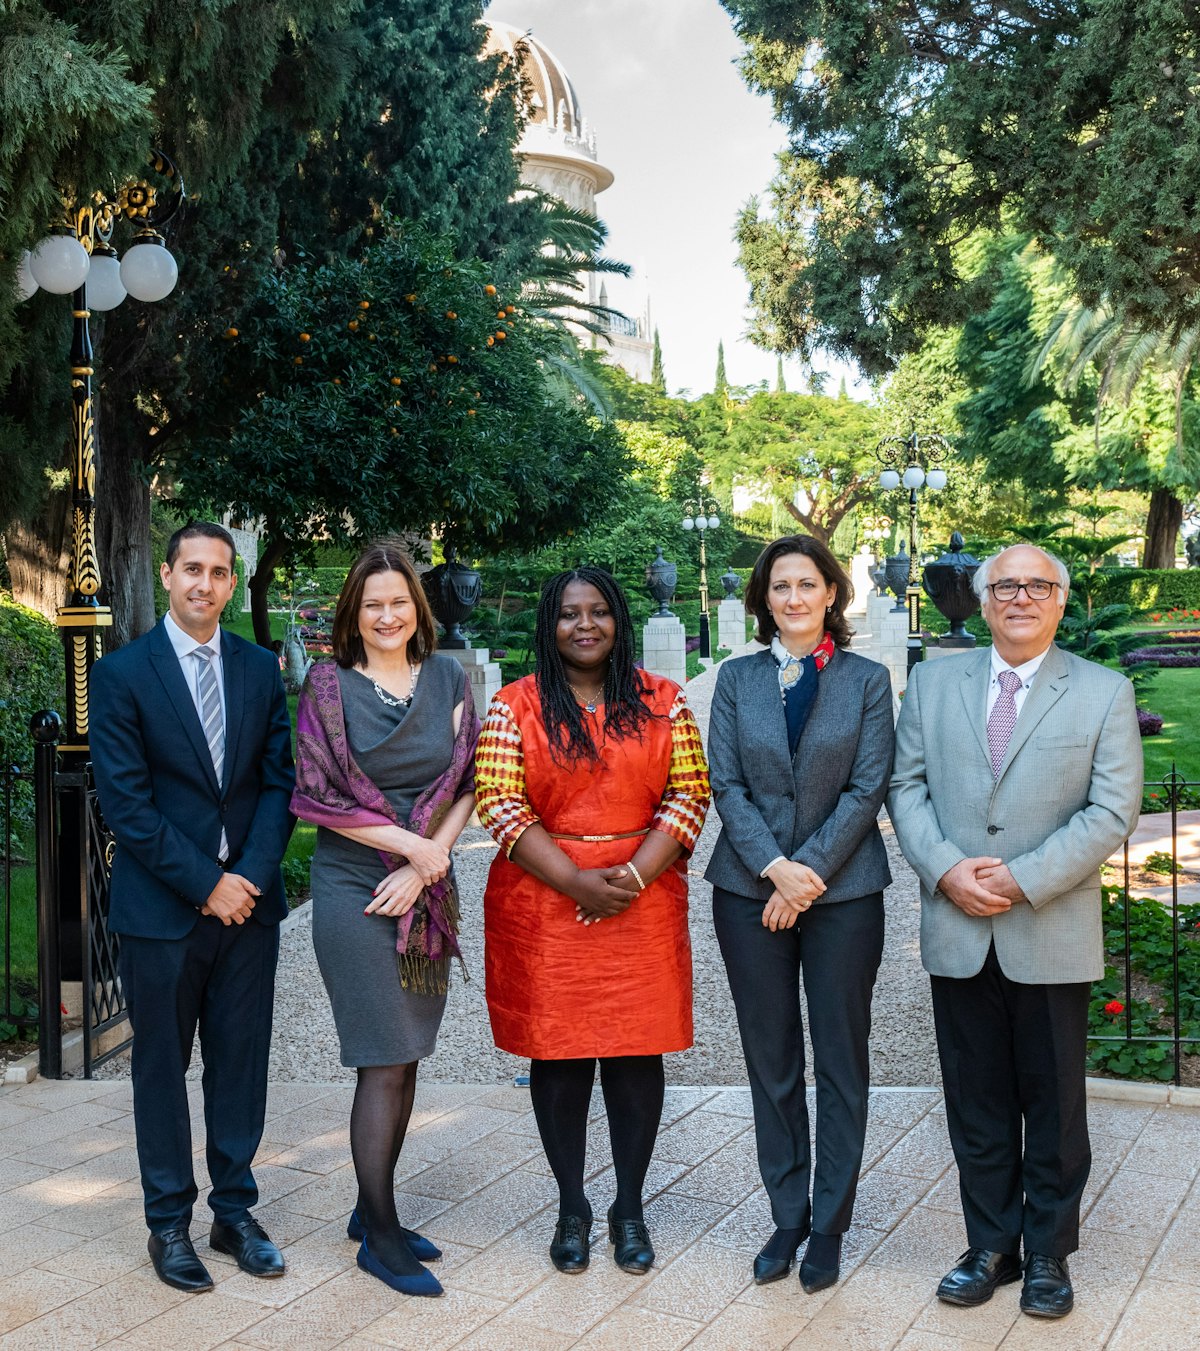 The members of the board of directors of the Baha’i International Development Organization were appointed for a five-year term beginning in November. The directors are (from left) Sina Rahmanian, Lori McLaughlin Noguchi, Maame Brodwemaba Nketsiah, Elisa Caney, and George Soraya. They recently held their first board meeting at the Baha’i World Centre.